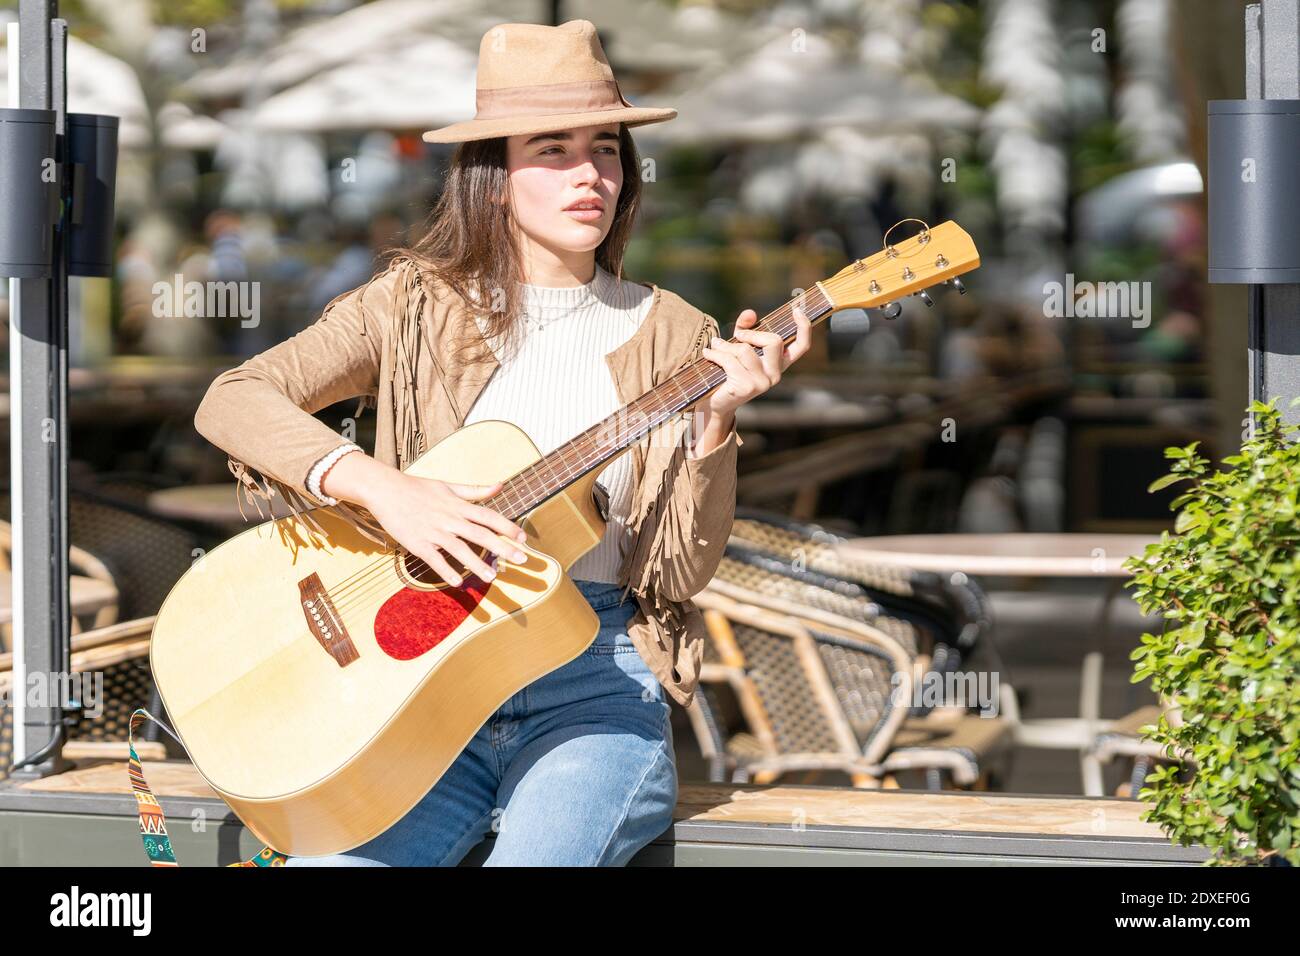 Young woman playing guitar while sitting on bench during sunny day Stock Photo